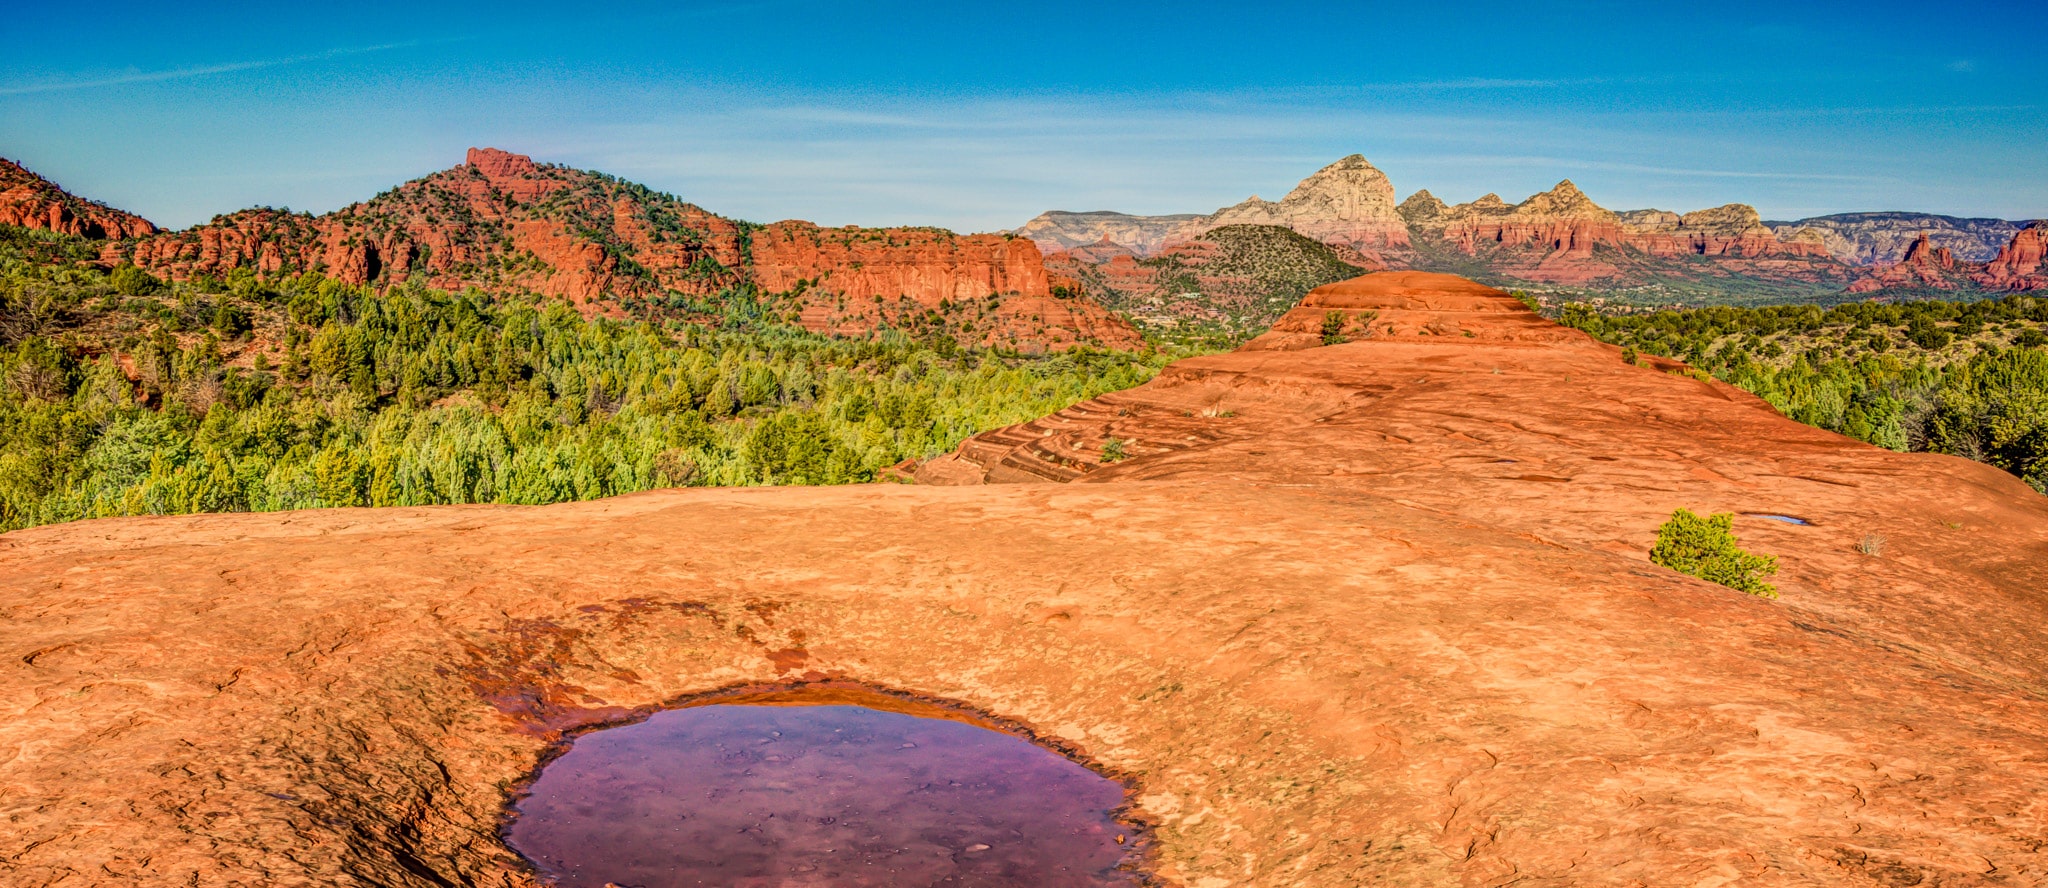 Submarine Rock provides a perfect viewing area for the iconic rock formations in Sedona, Arizona.